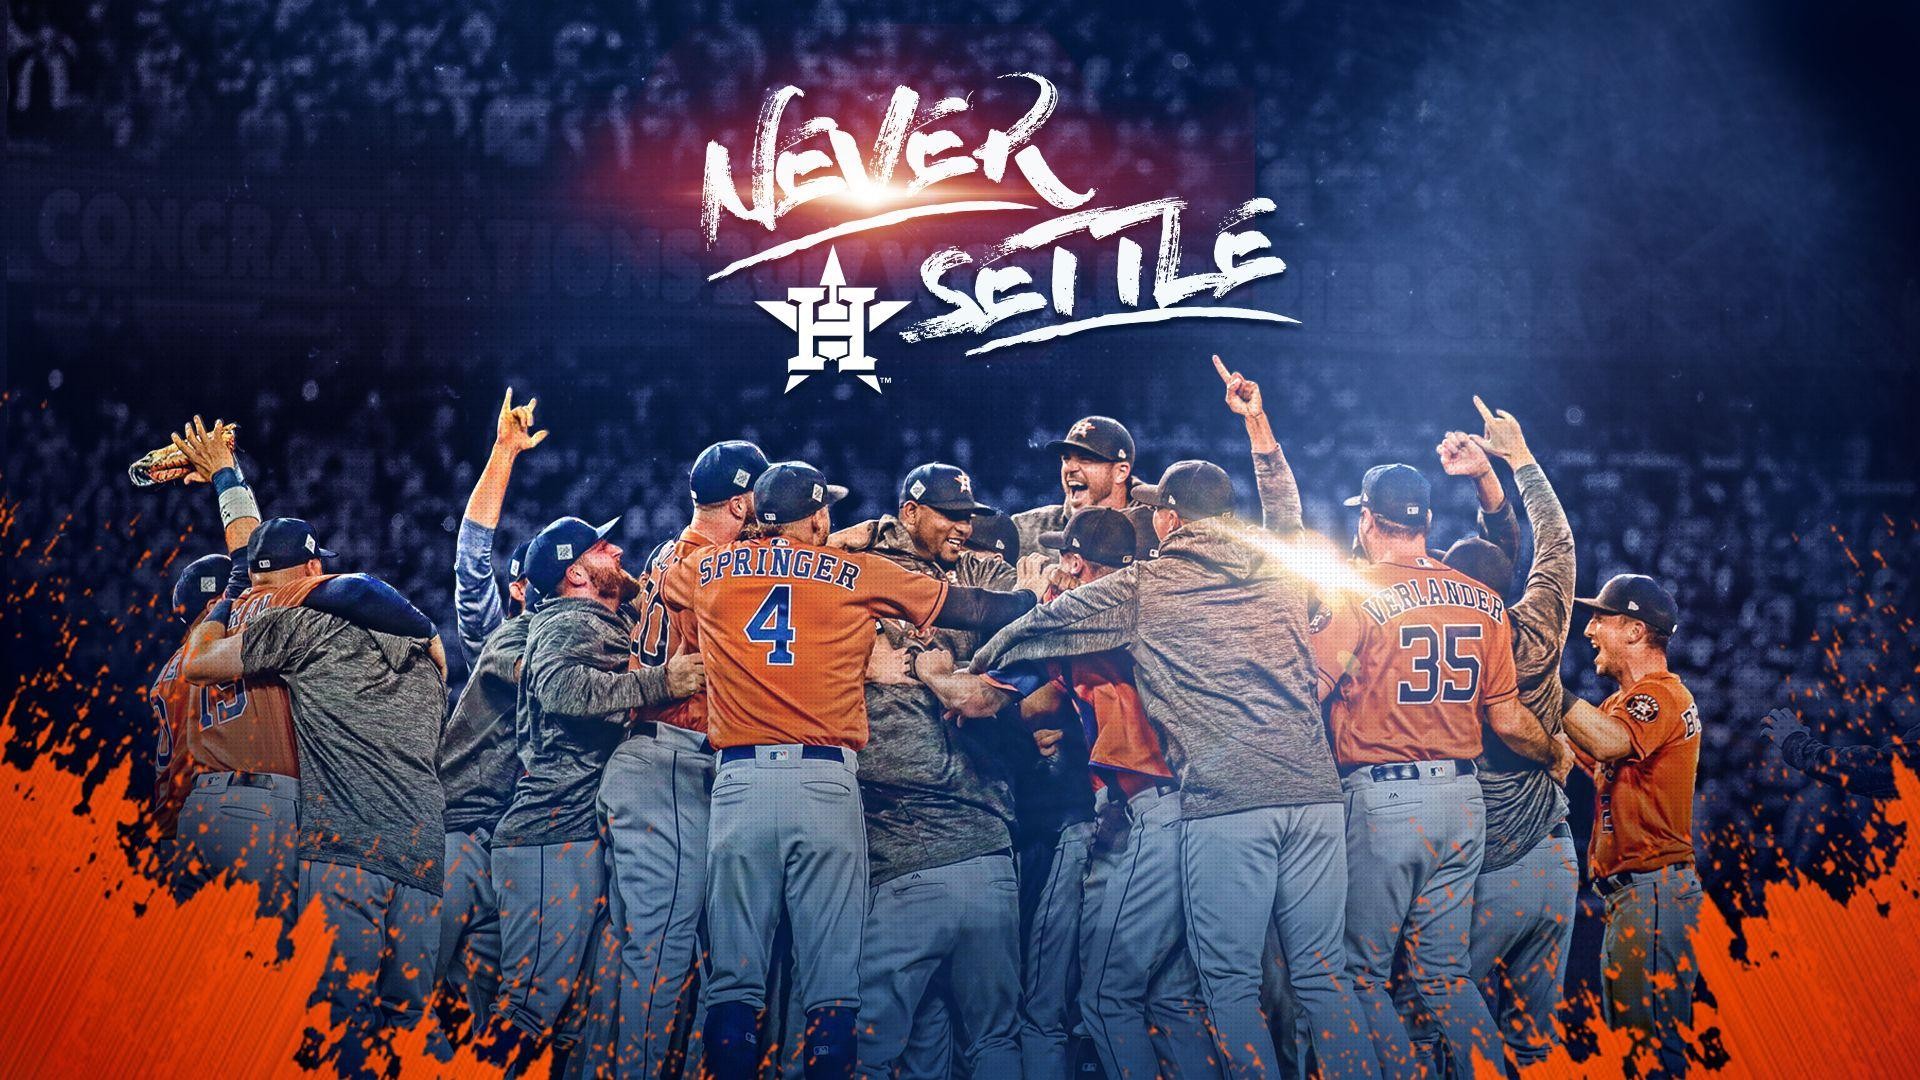 Houston Astros HD Wallpapers with high-resolution 1920x1080 pixel. You can use this wallpaper for Mac Desktop Wallpaper, Laptop Screensavers, Android Wallpapers, Tablet or iPhone Home Screen and another mobile phone device